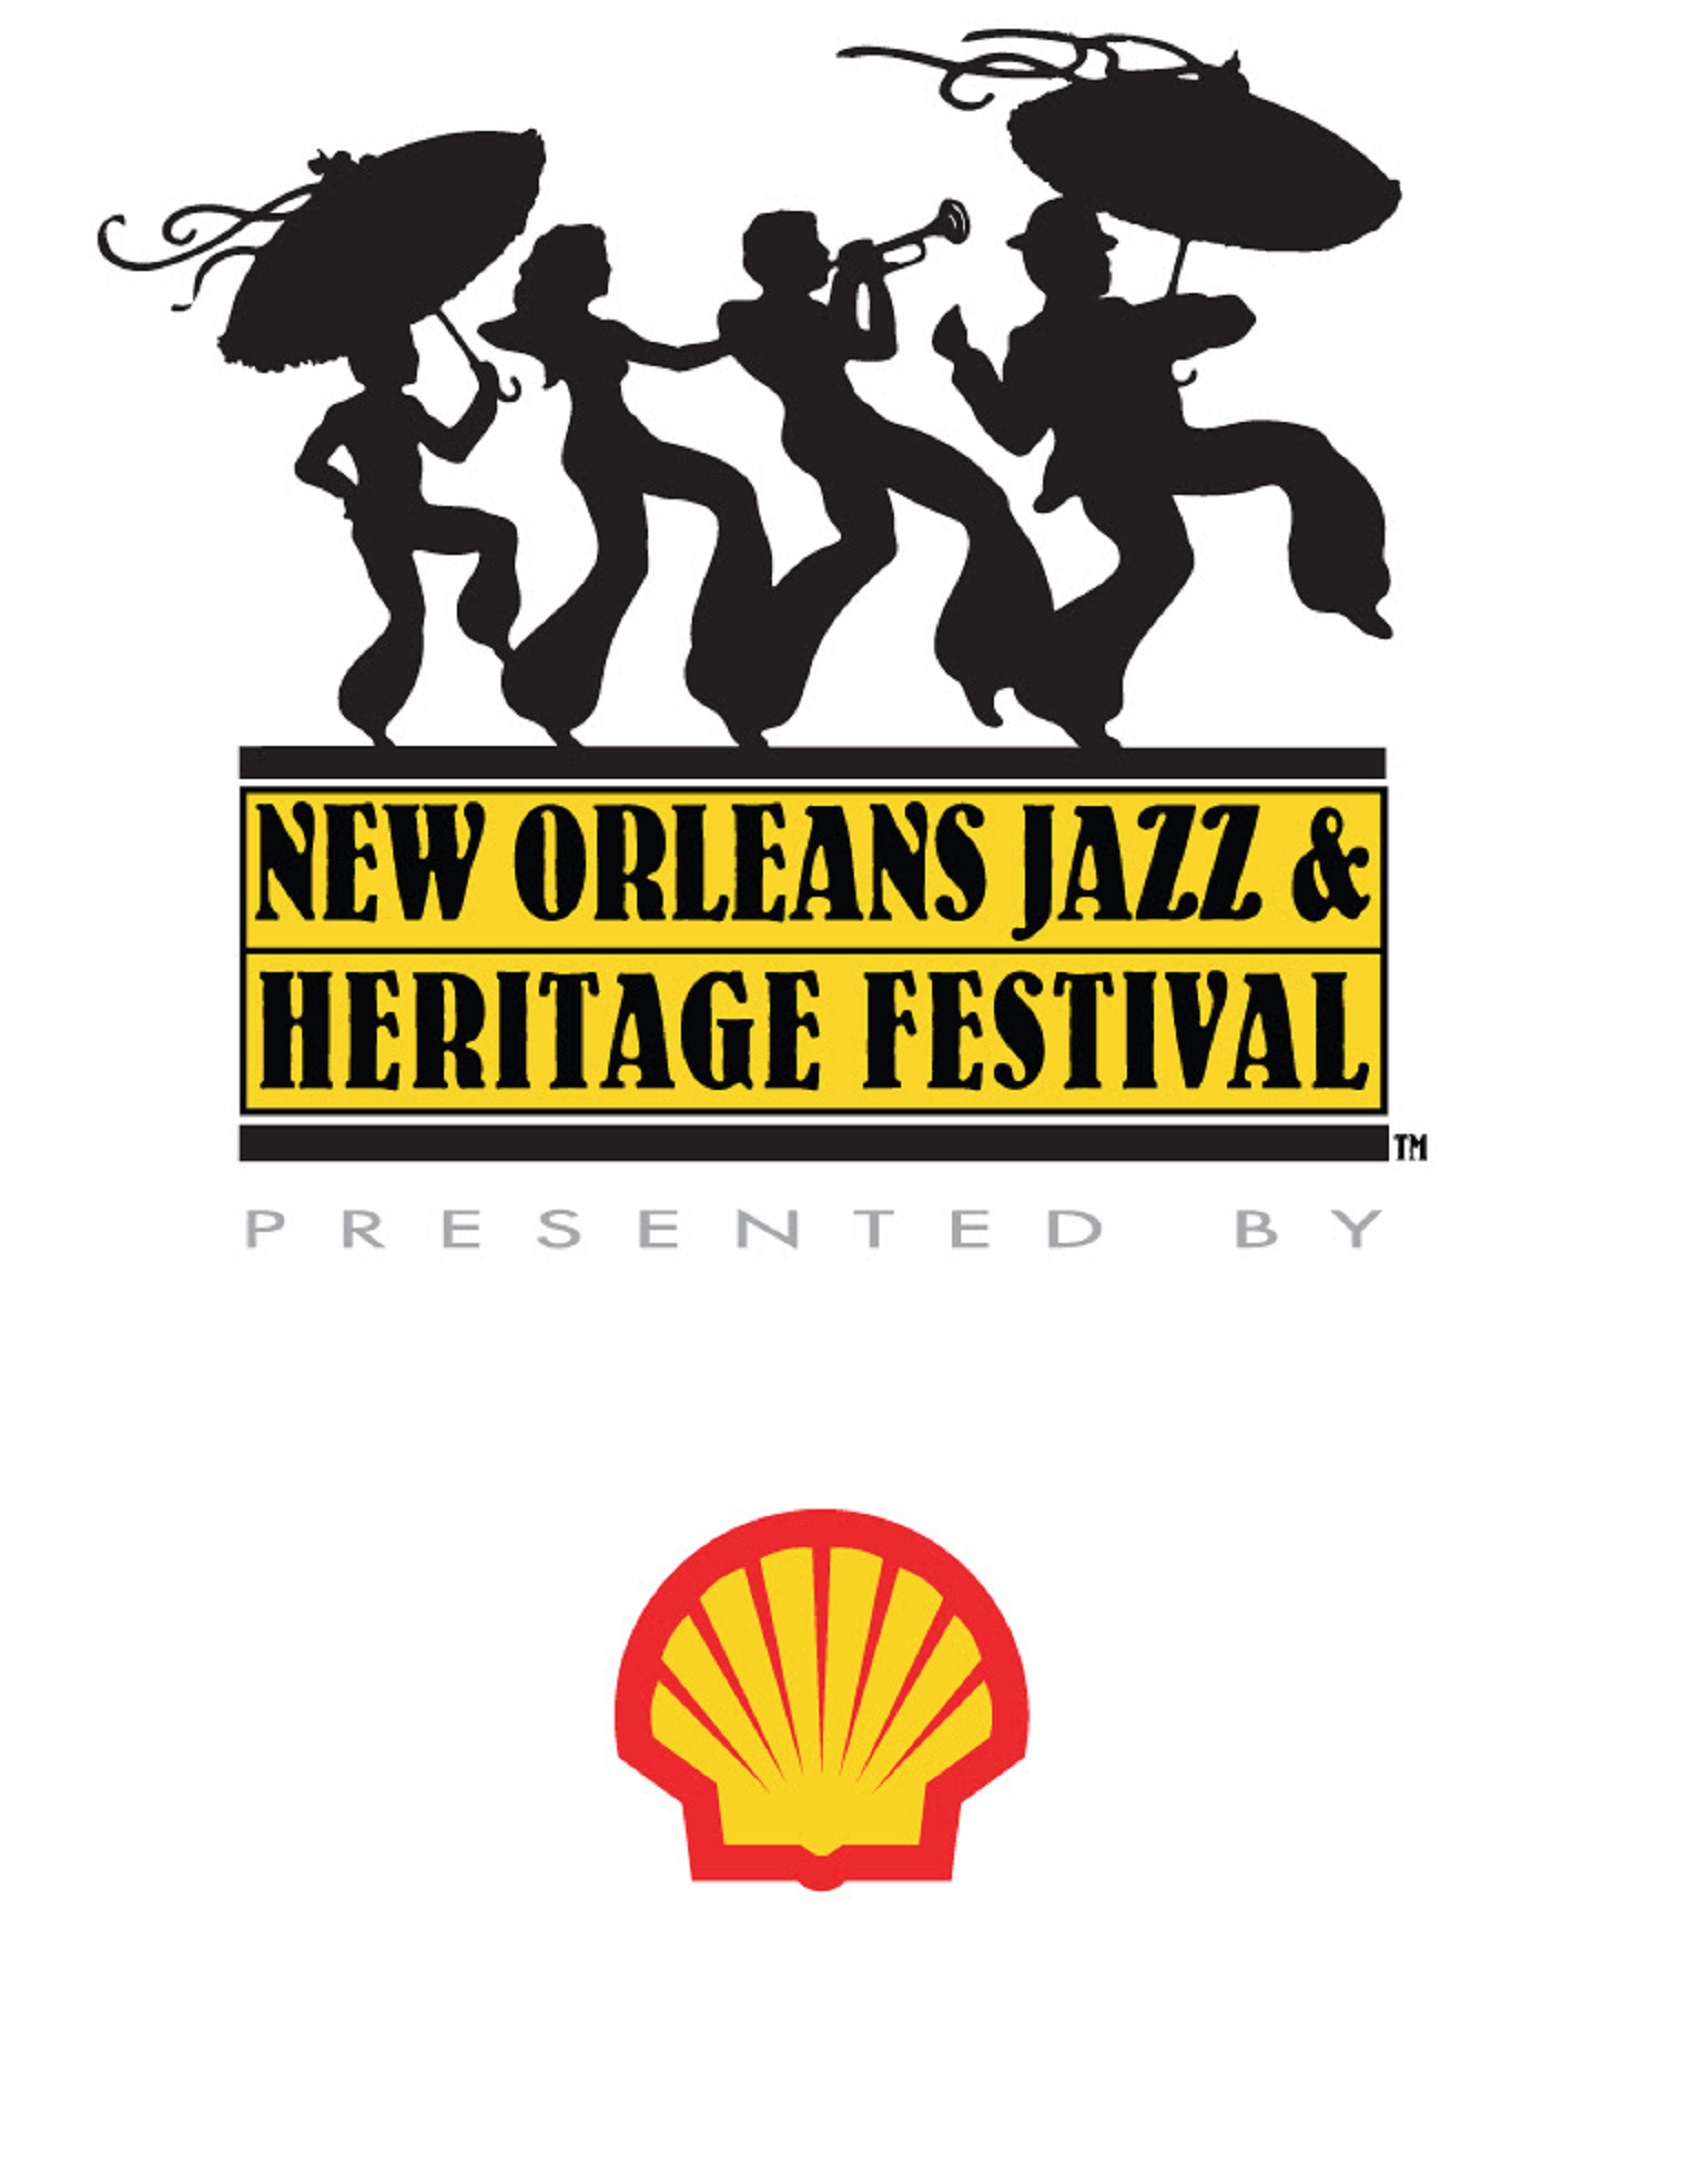 Jazz Fest Daily Music Lineups Announced/Single-Day Tickets On Sale Now!